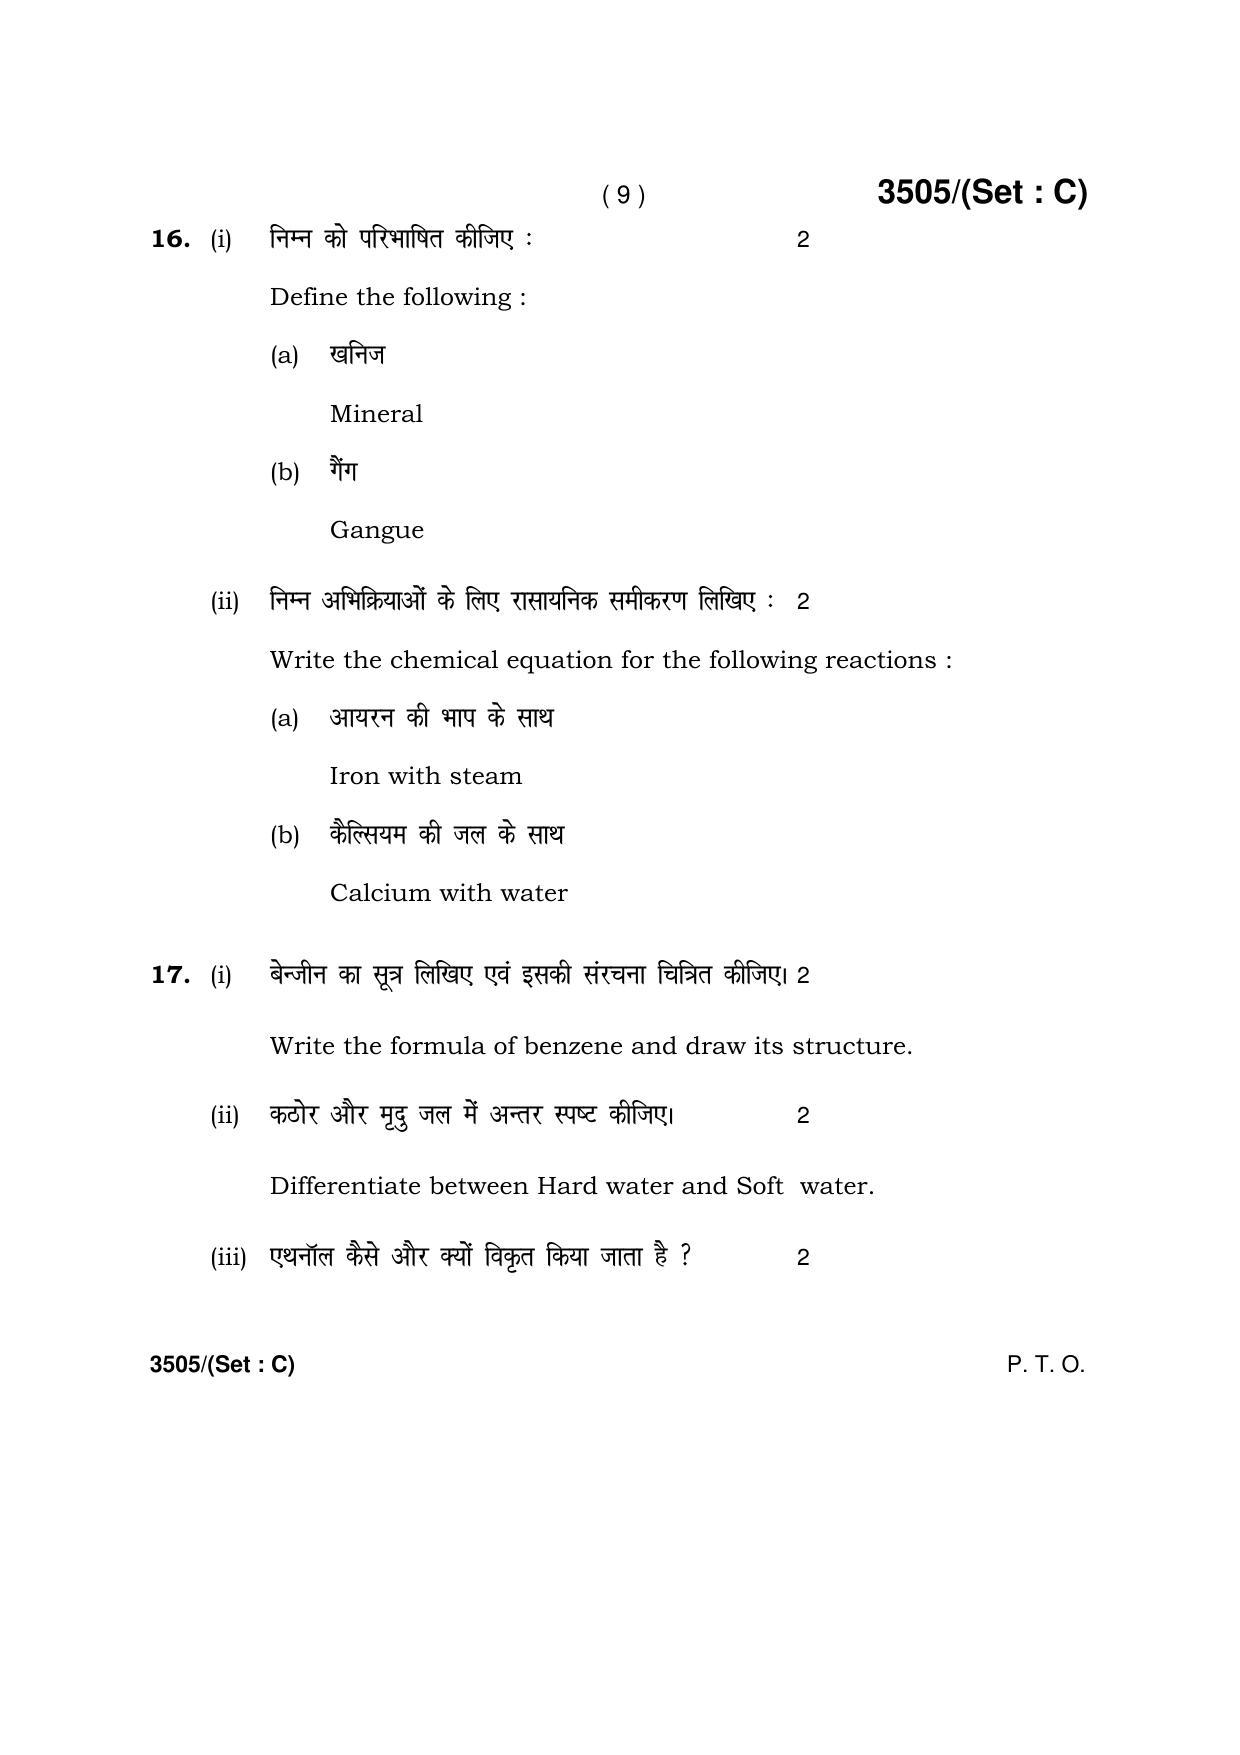 Haryana Board HBSE Class 10 Science -C 2018 Question Paper - Page 9